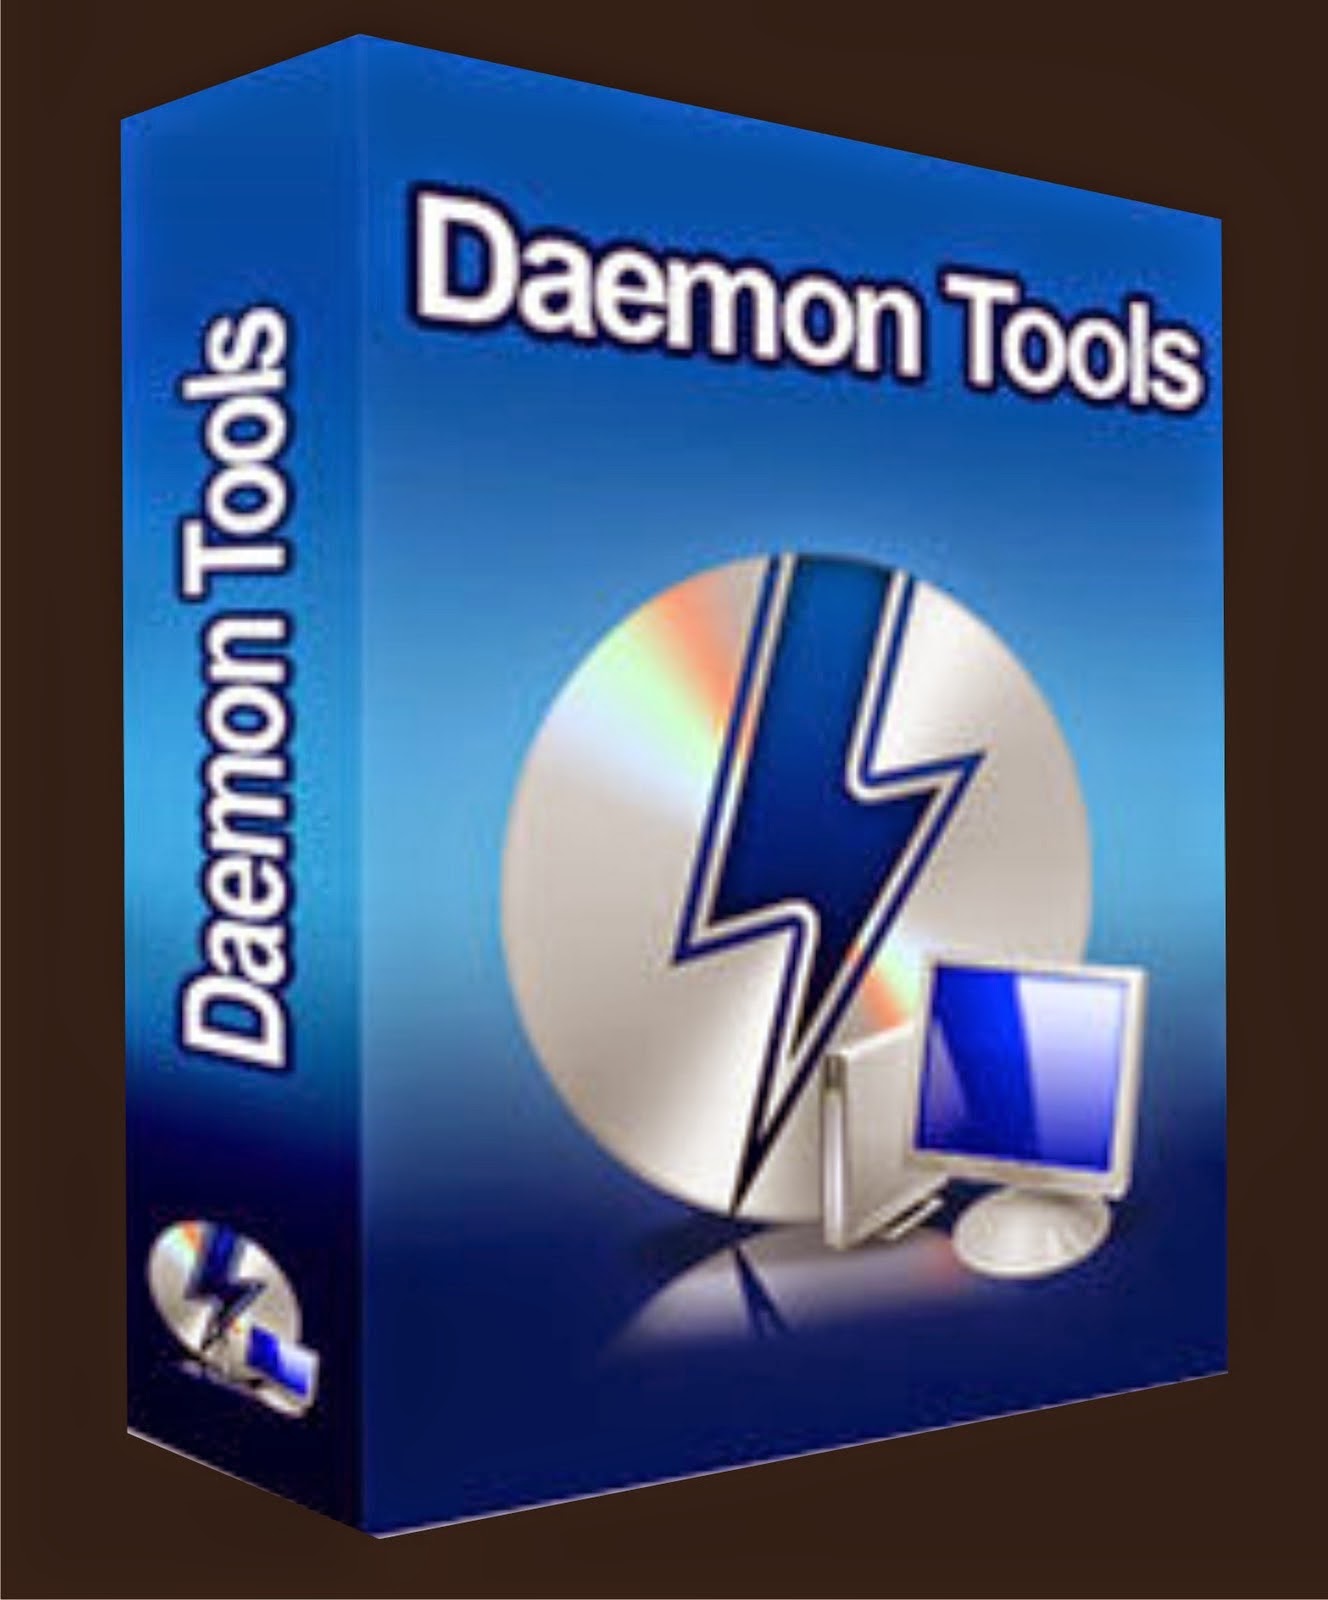 daemon tools pro free download for windows xp